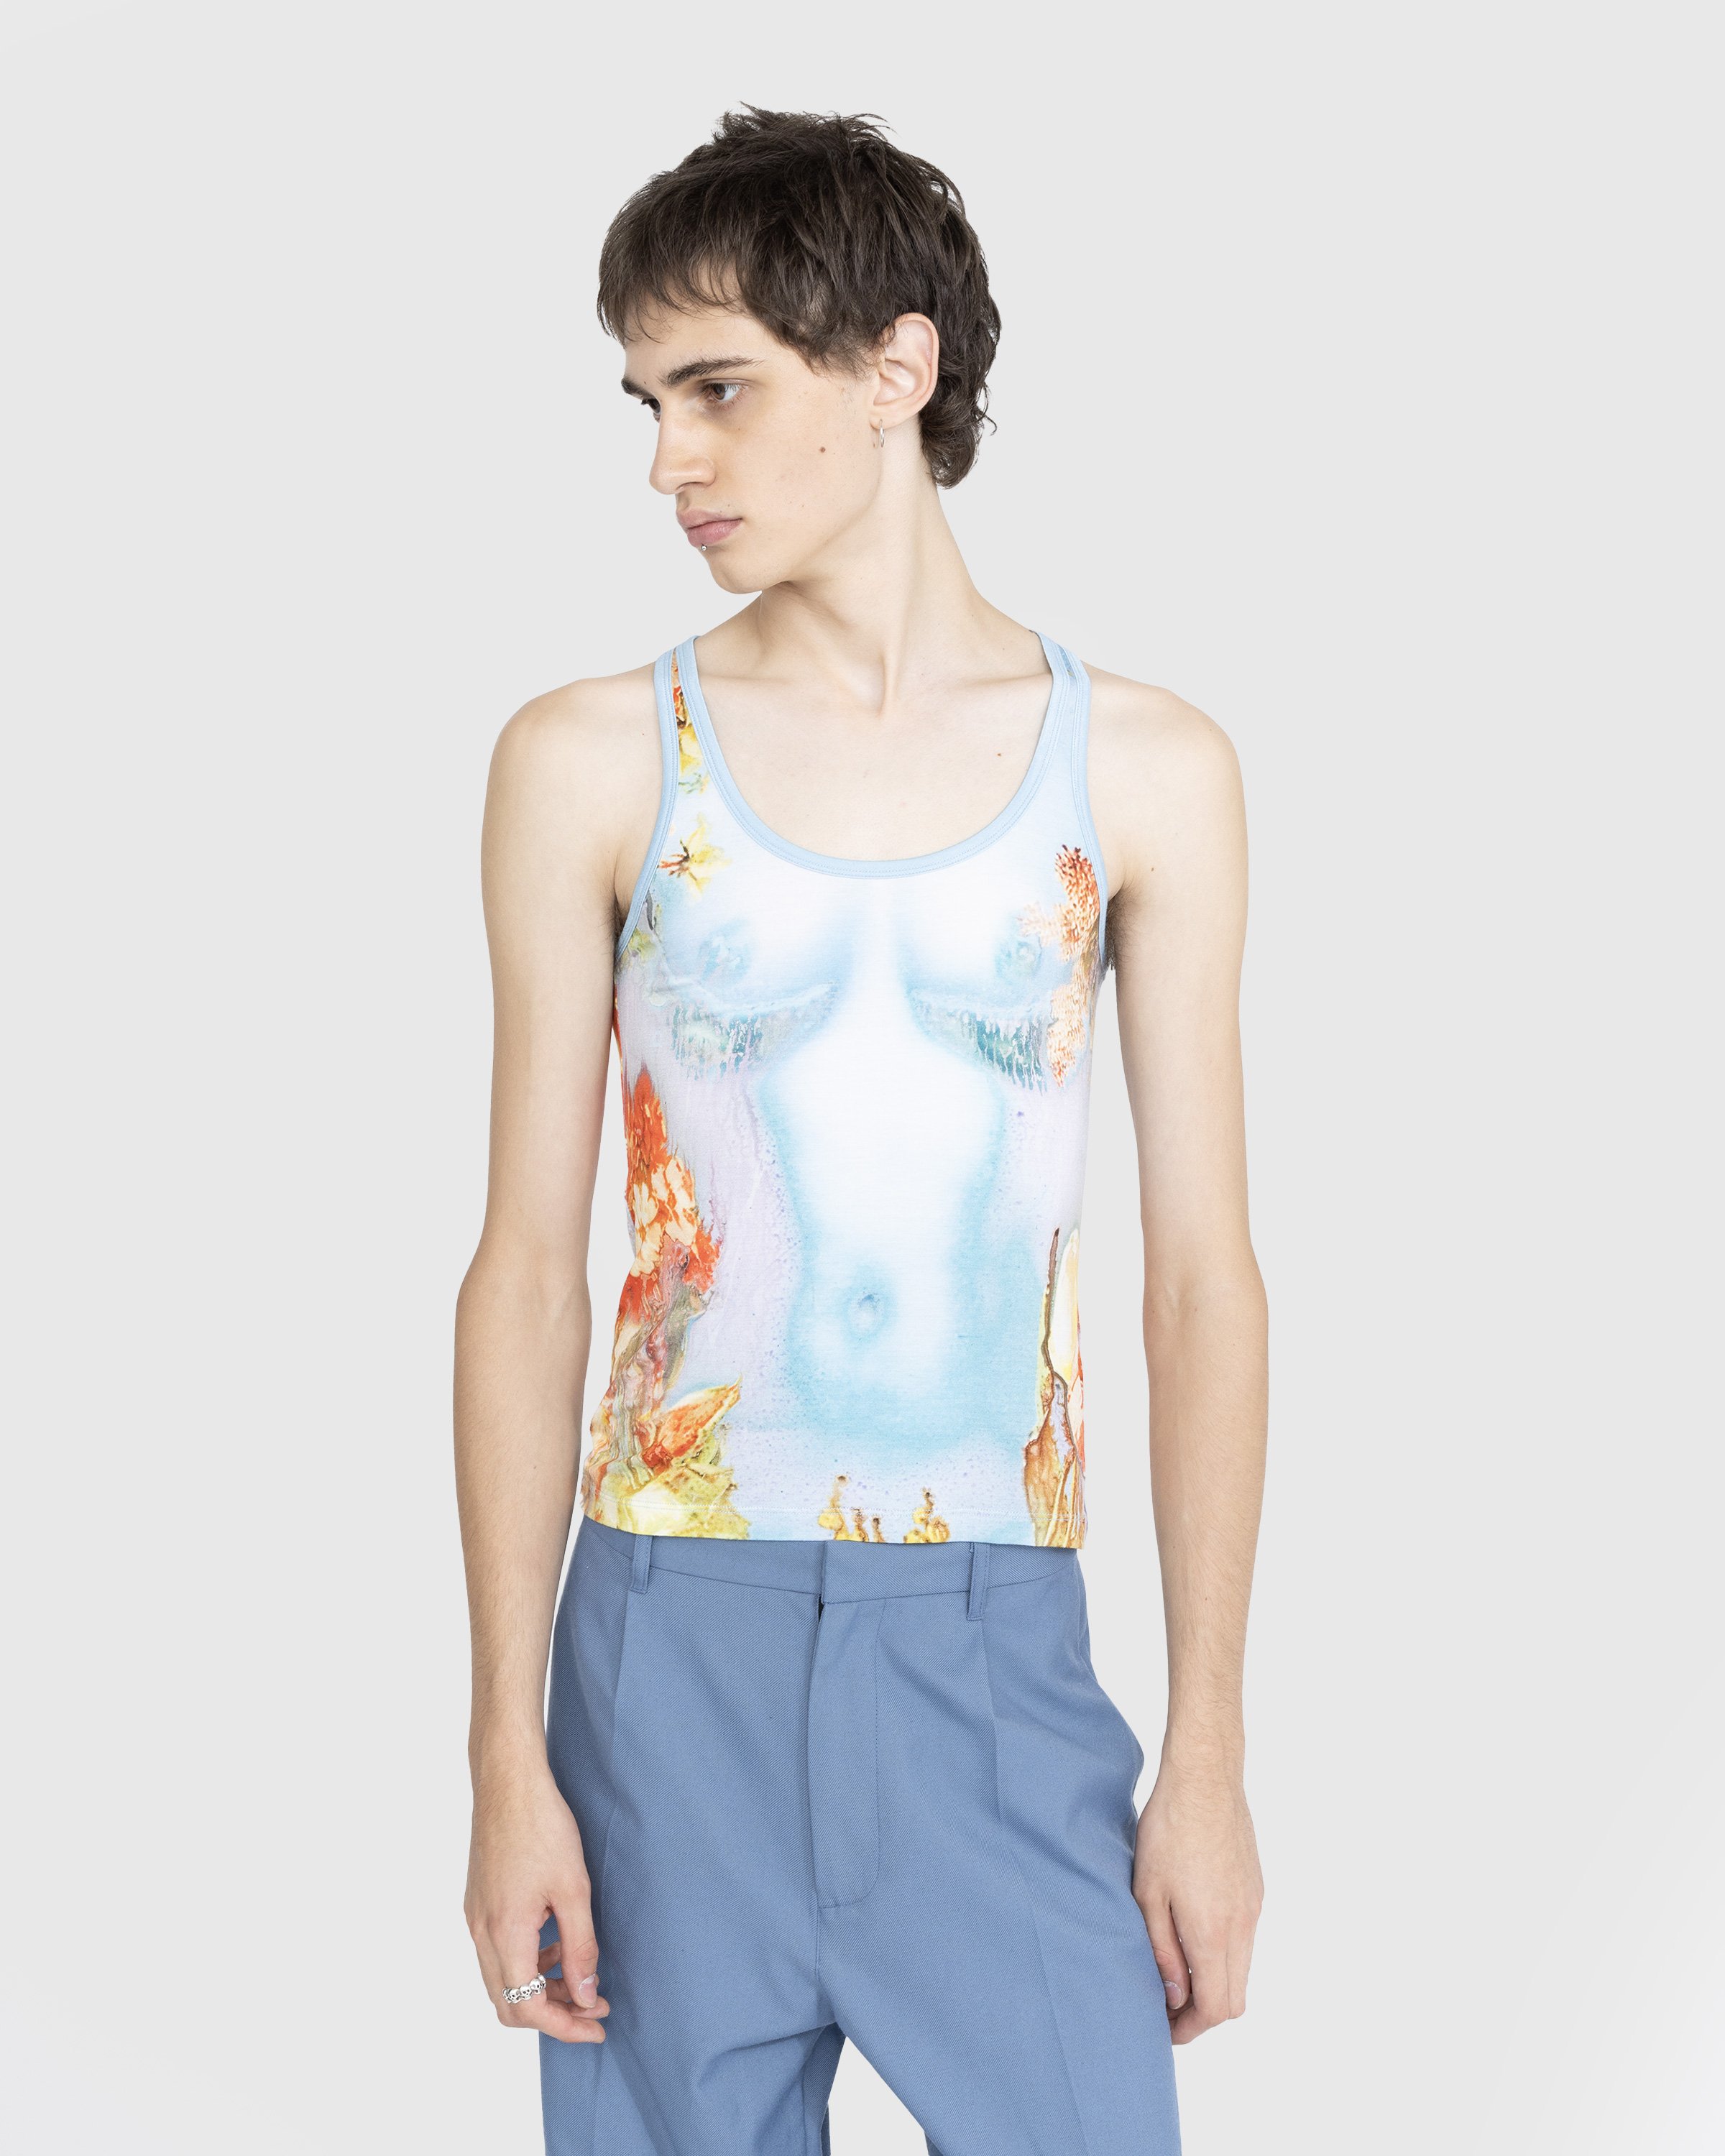 Jean Paul Gaultier - Printed Body Flowers Tank Top Blue - Clothing - Blue - Image 2